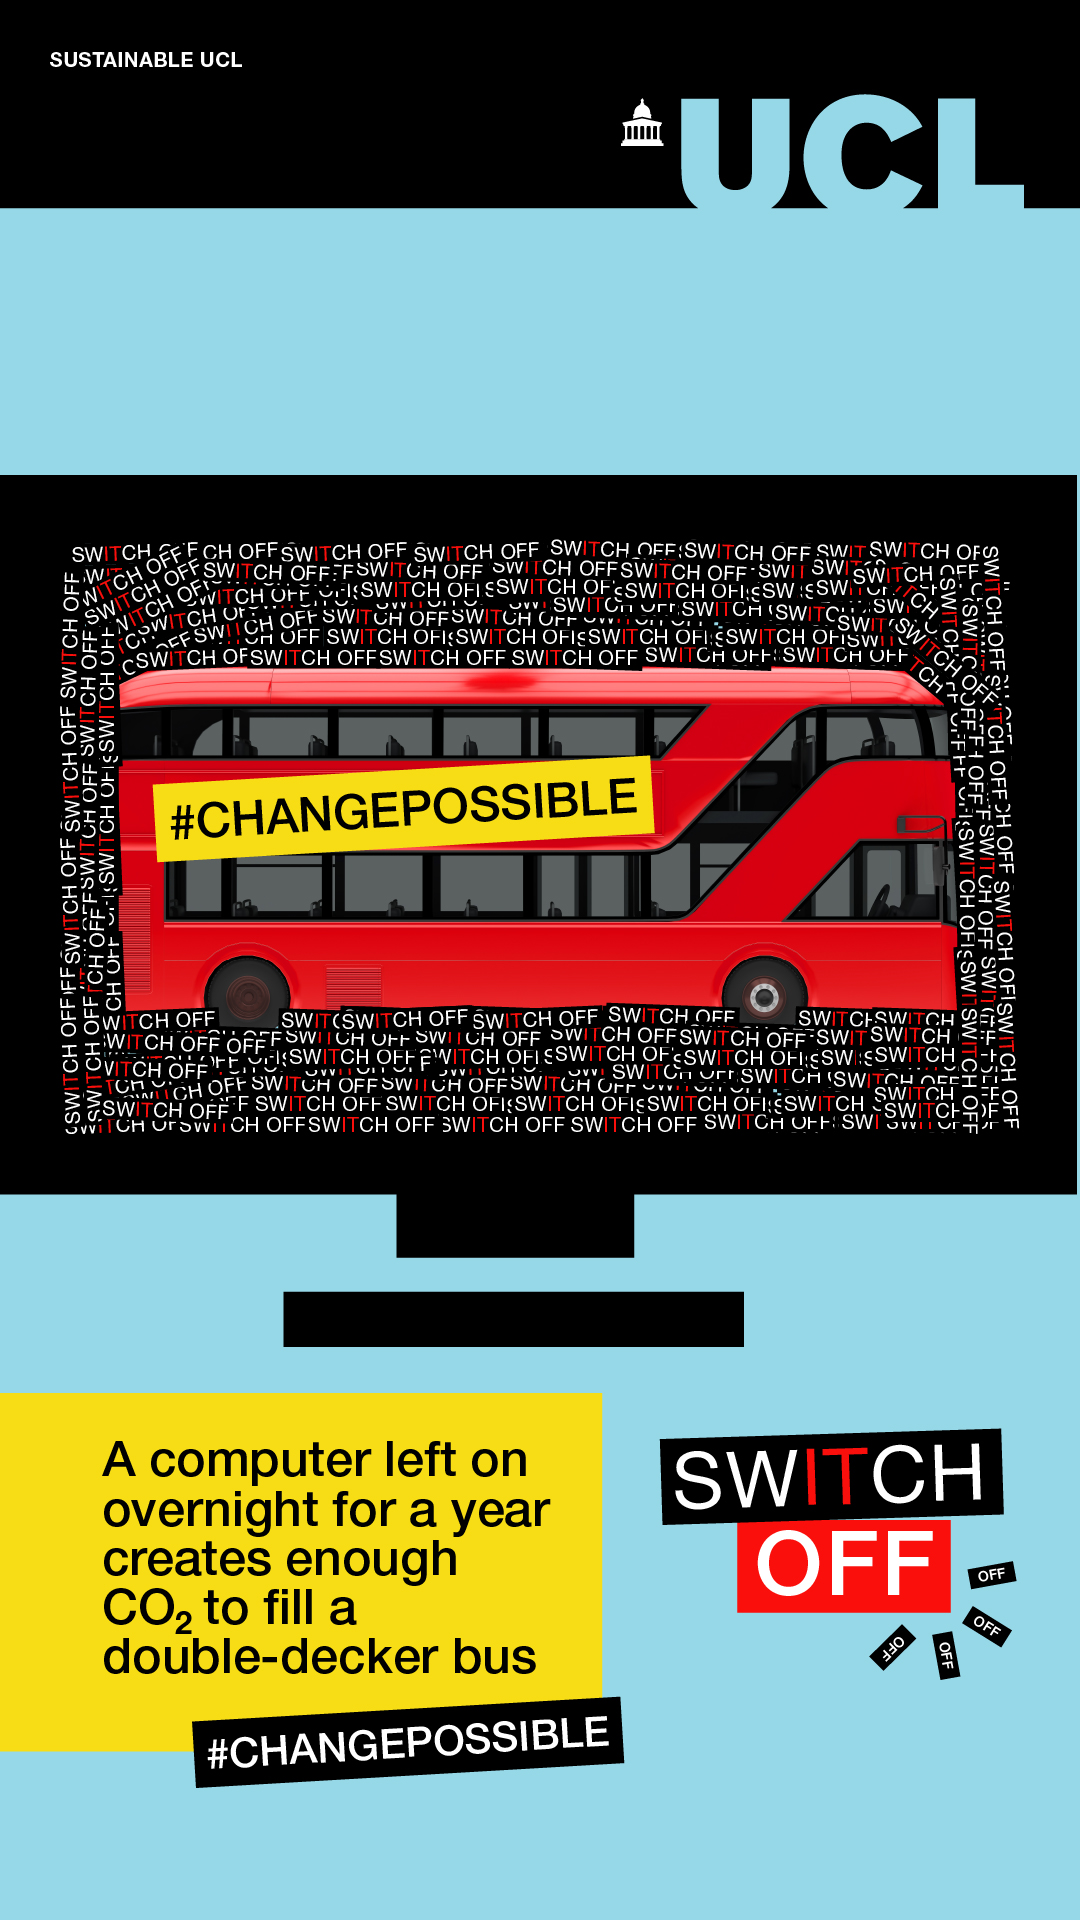 Image of a bus on a computer screen, text reads: a computer left on overnight for a year creates enough CO2 to fill a double-decker bus